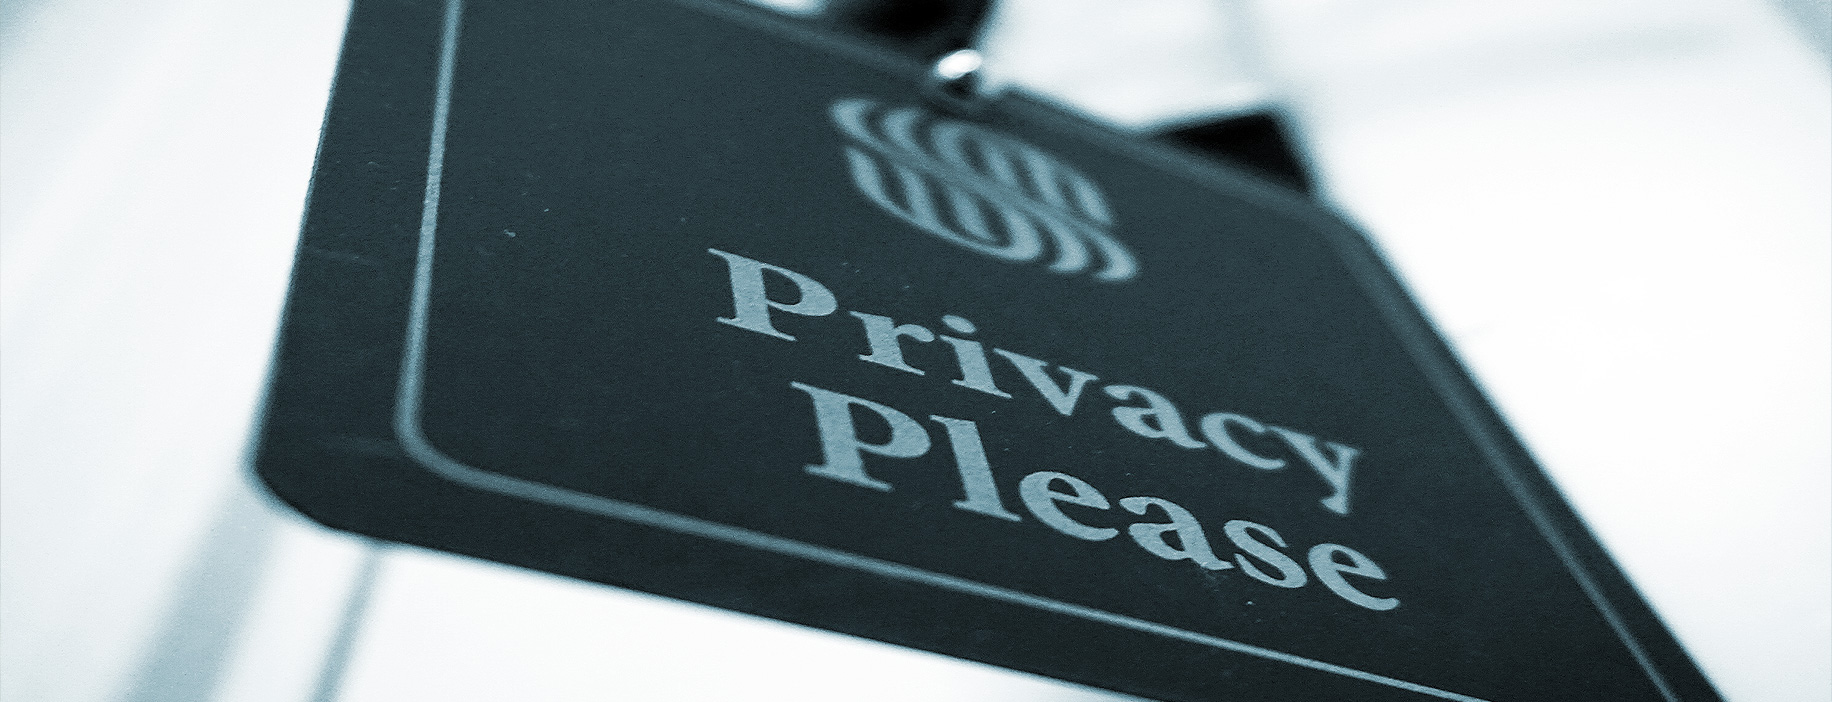 HQ Therapy Privacy Policy Header